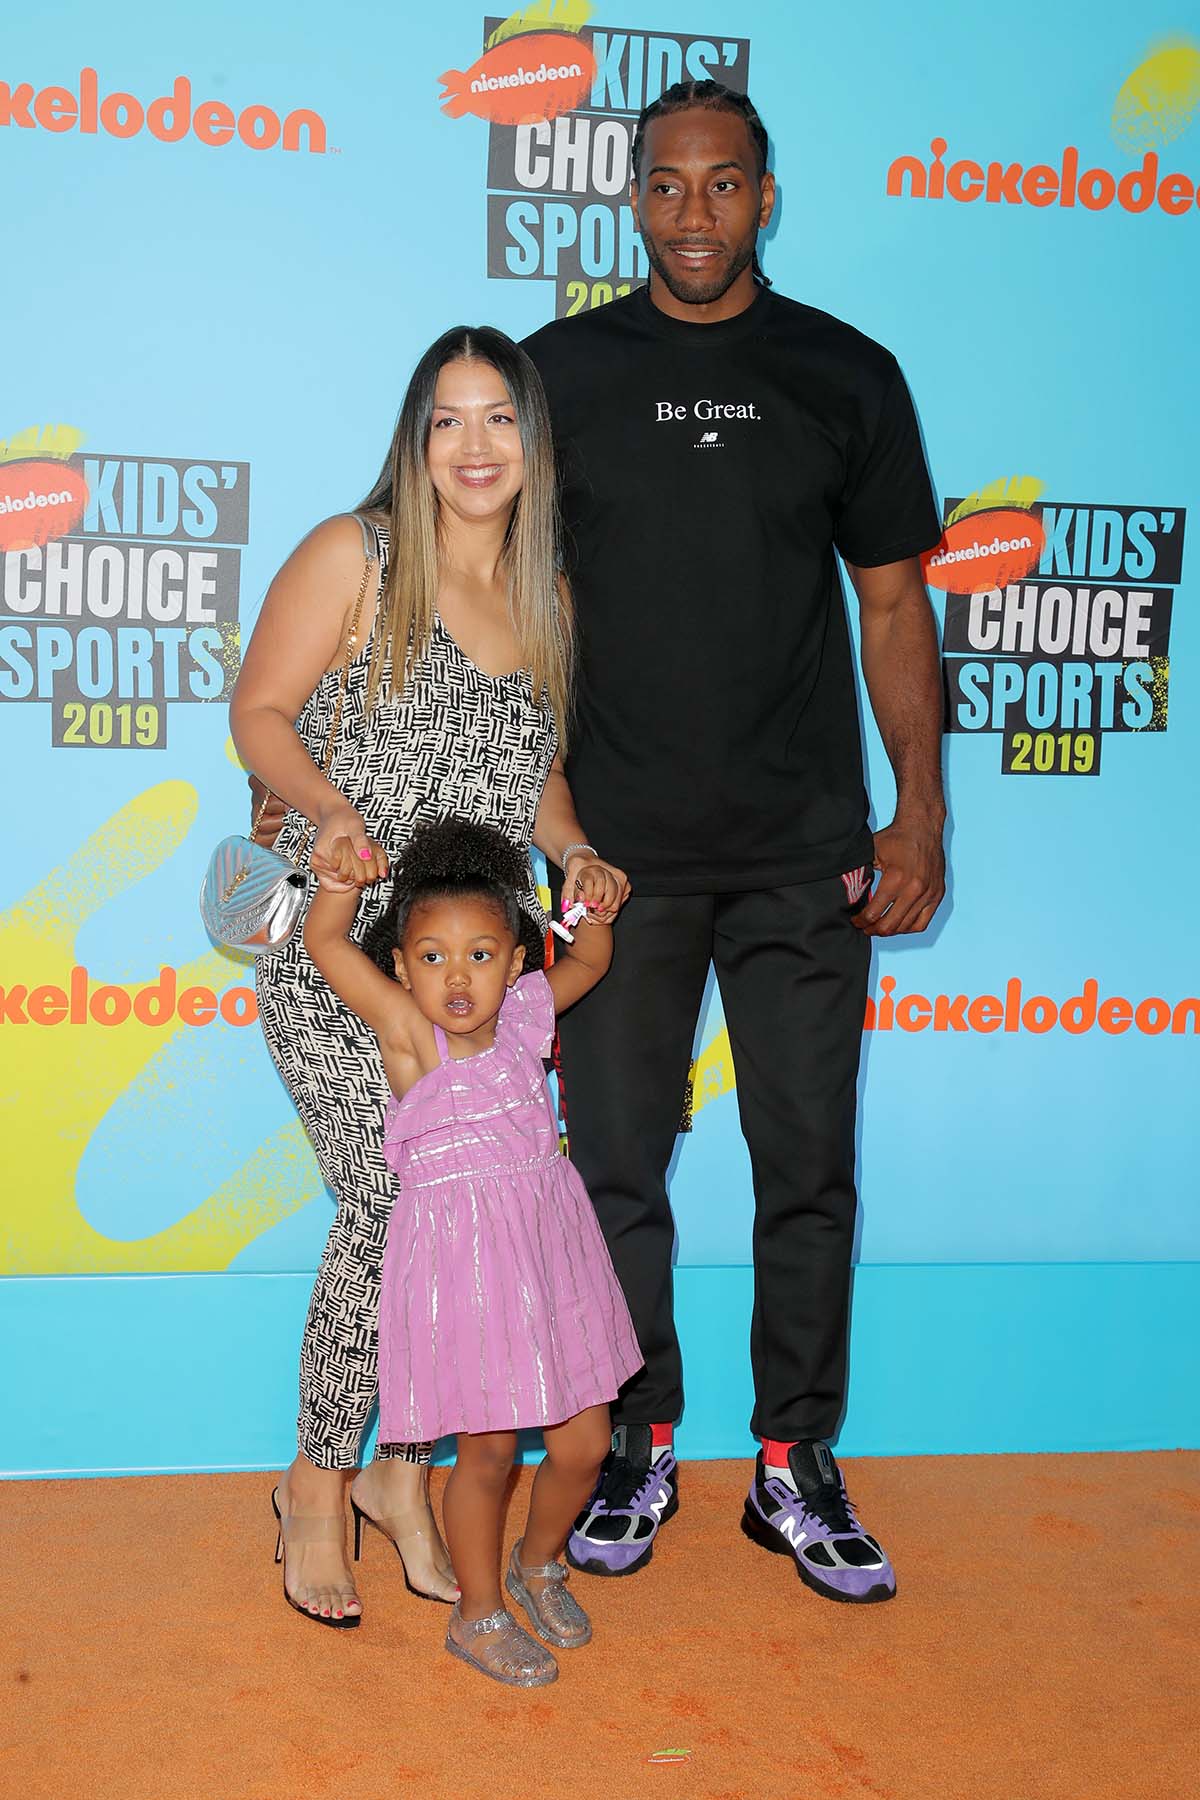 NBA Wives, Girlfriends of Basketball Players A Guide